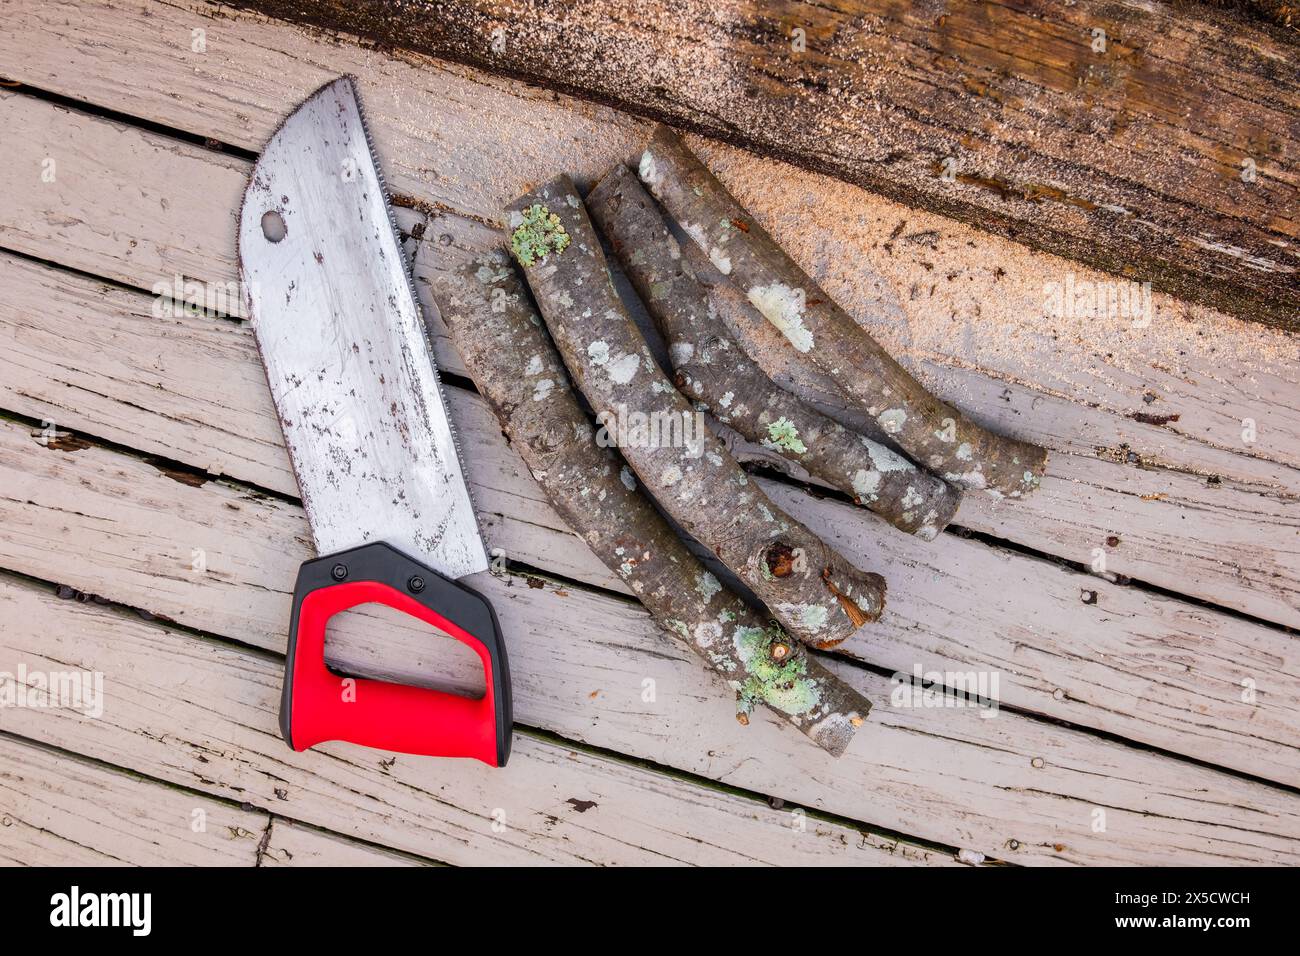 Old rusty handsaw over a wooden boards background with four logs of cut firewood. Stock Photo